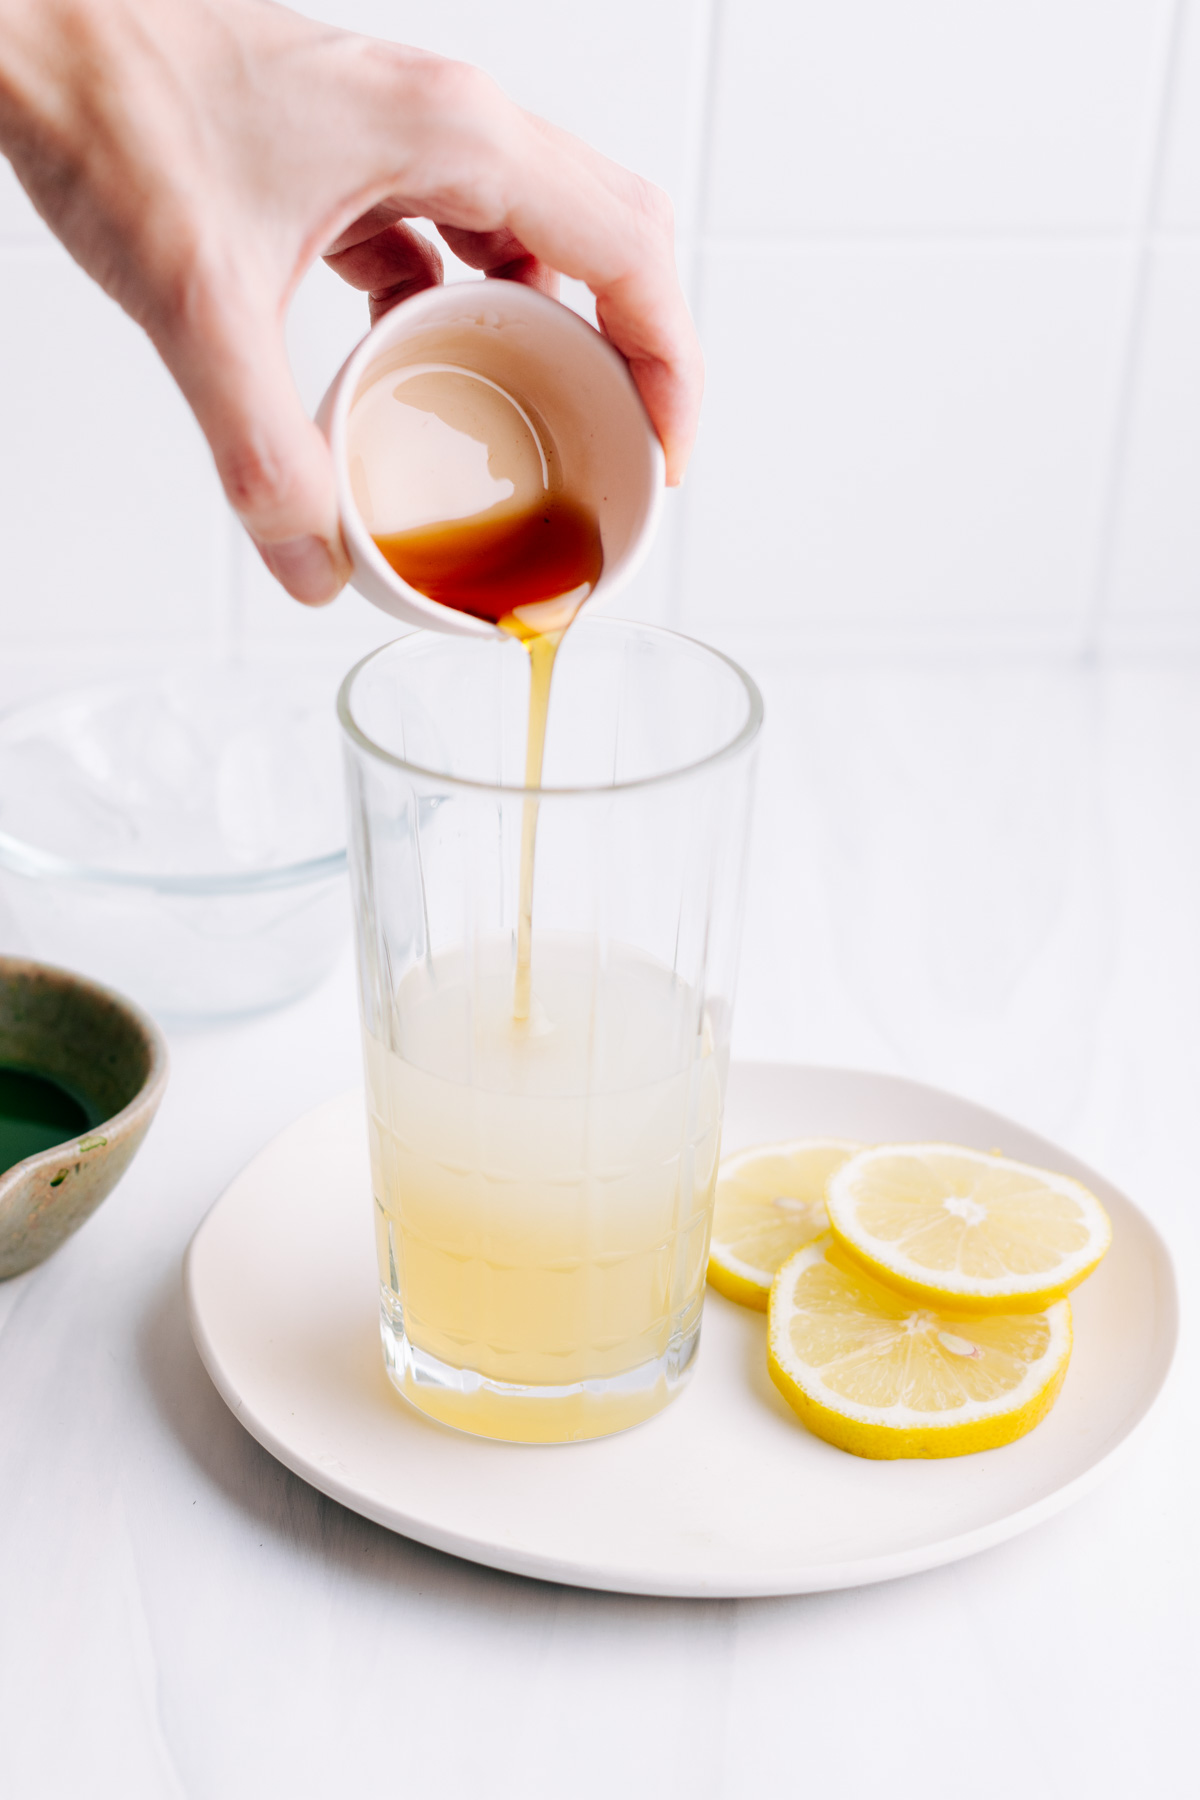 A glass filled half with lemon juice and water on a white plate with lemon slices and a hand pouring in maple syrup in the glass